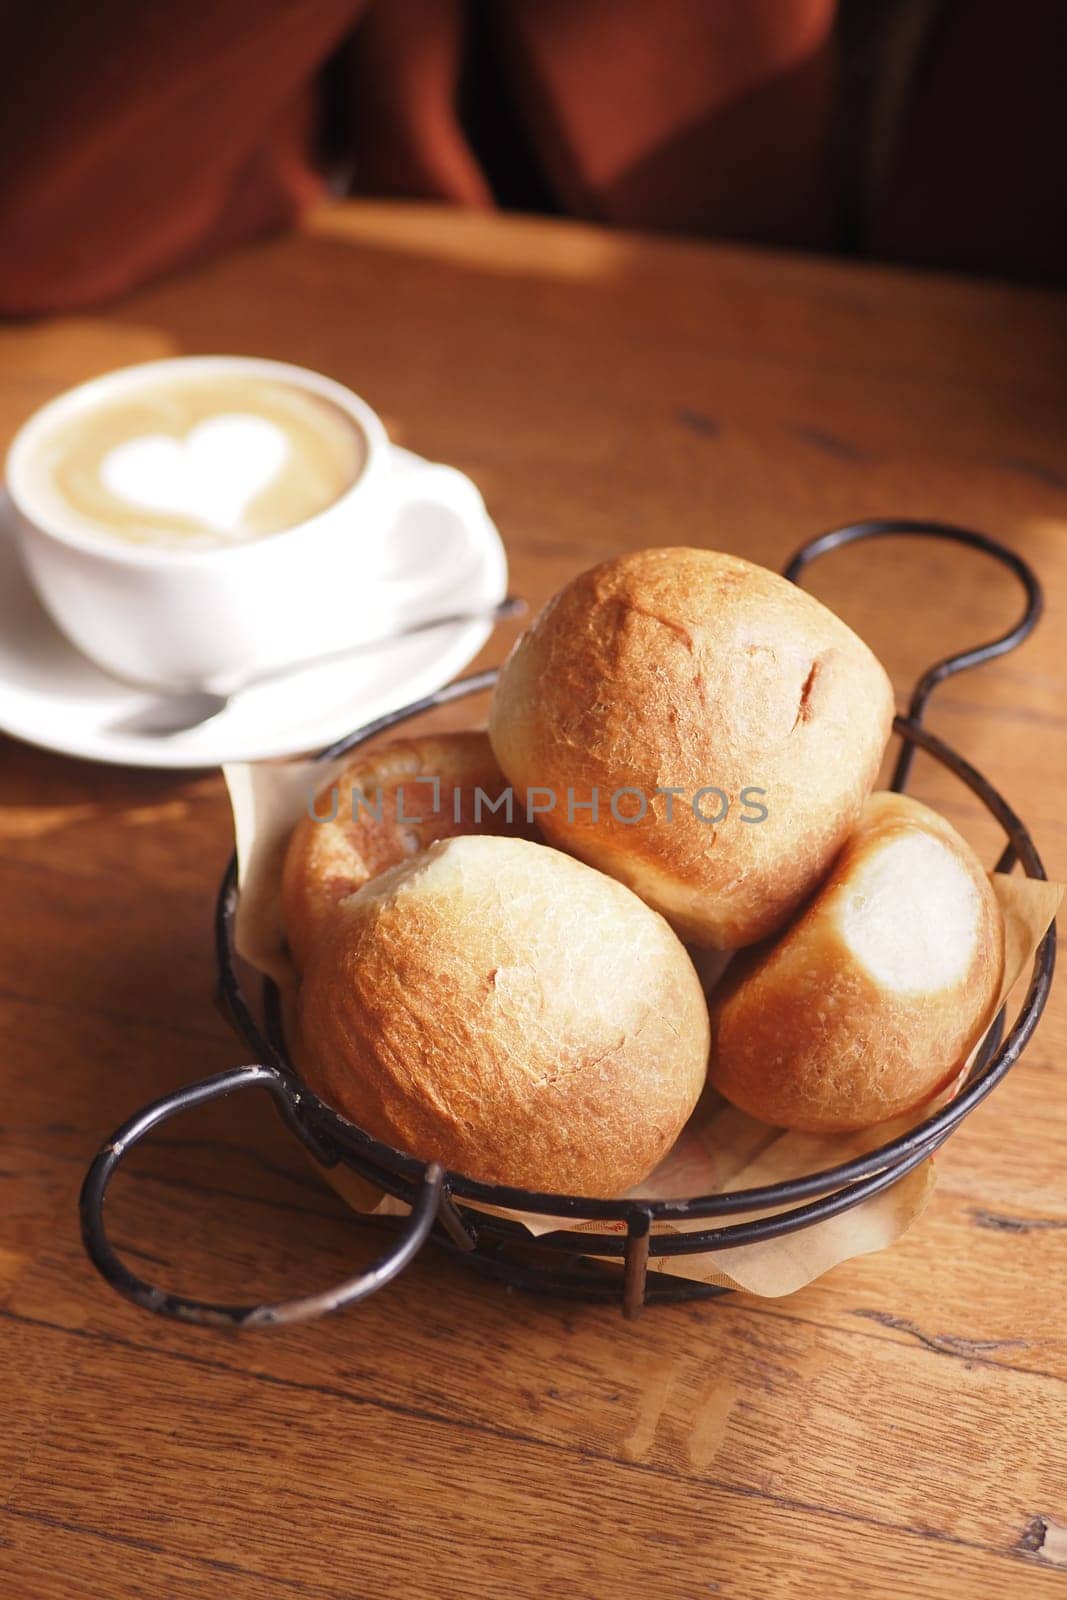 Three bread rolls rest in a black bowl on the table.